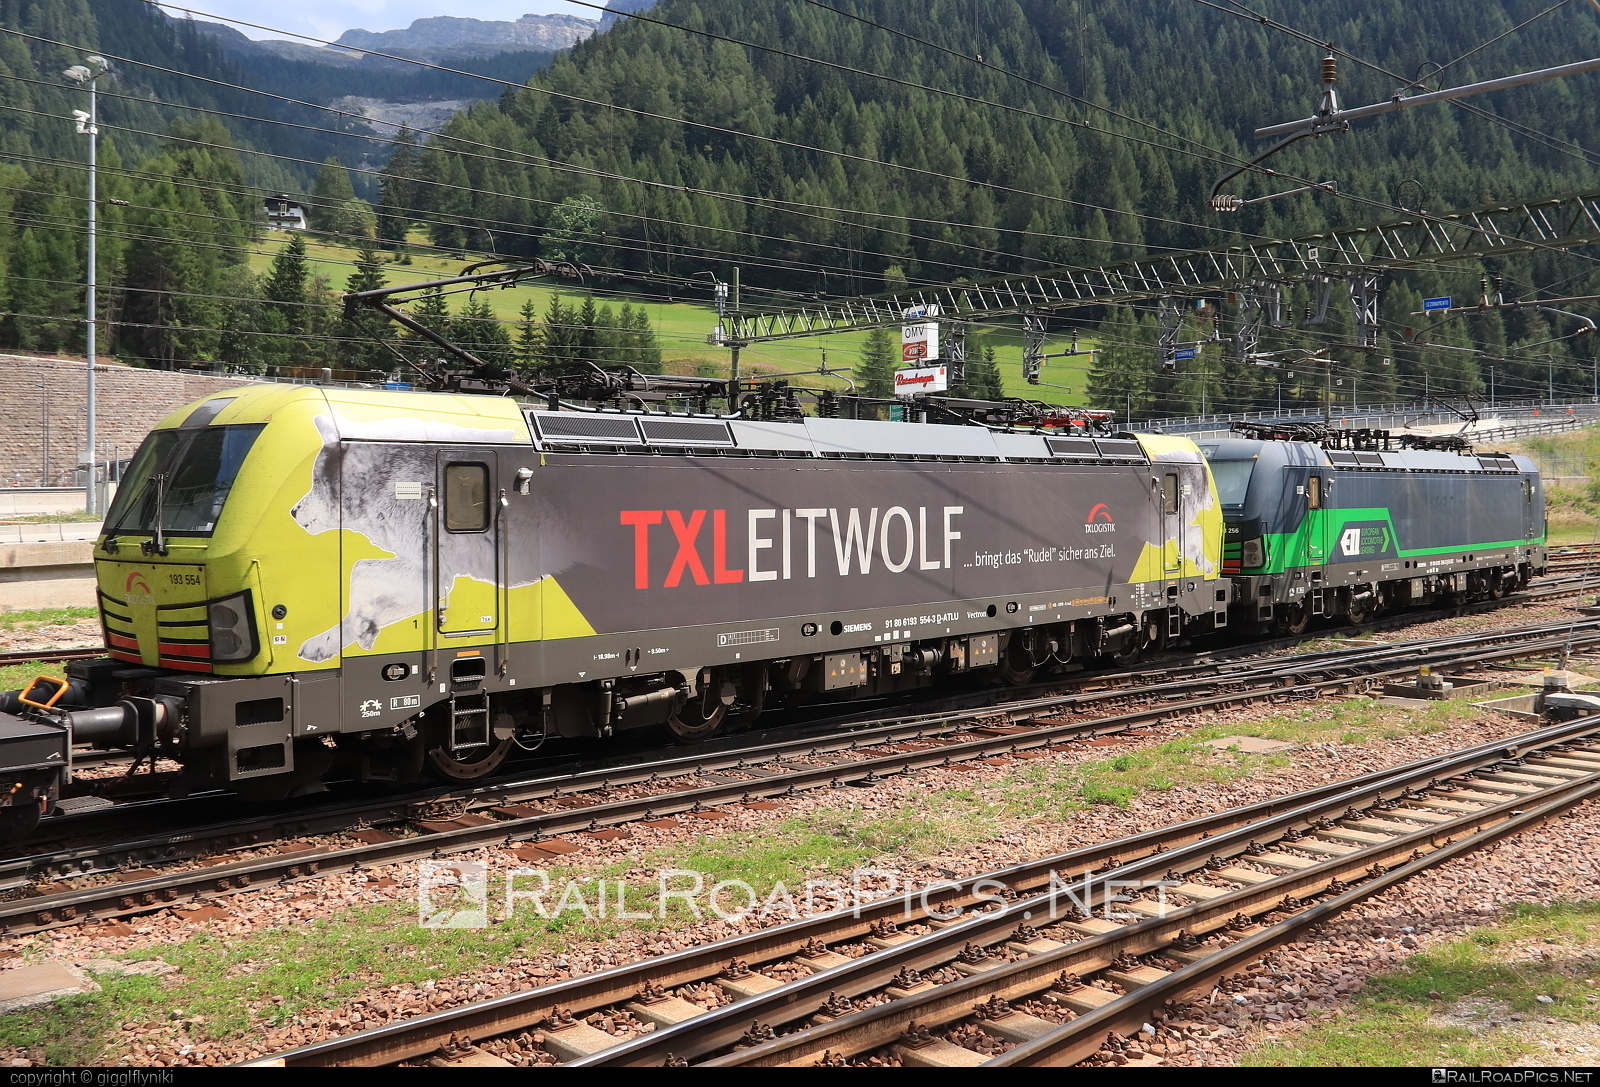 Siemens Vectron MS - 193 554 operated by TXLogistik #alphatrainsluxembourg #siemens #siemensVectron #siemensVectronMS #txlogistik #vectron #vectronMS